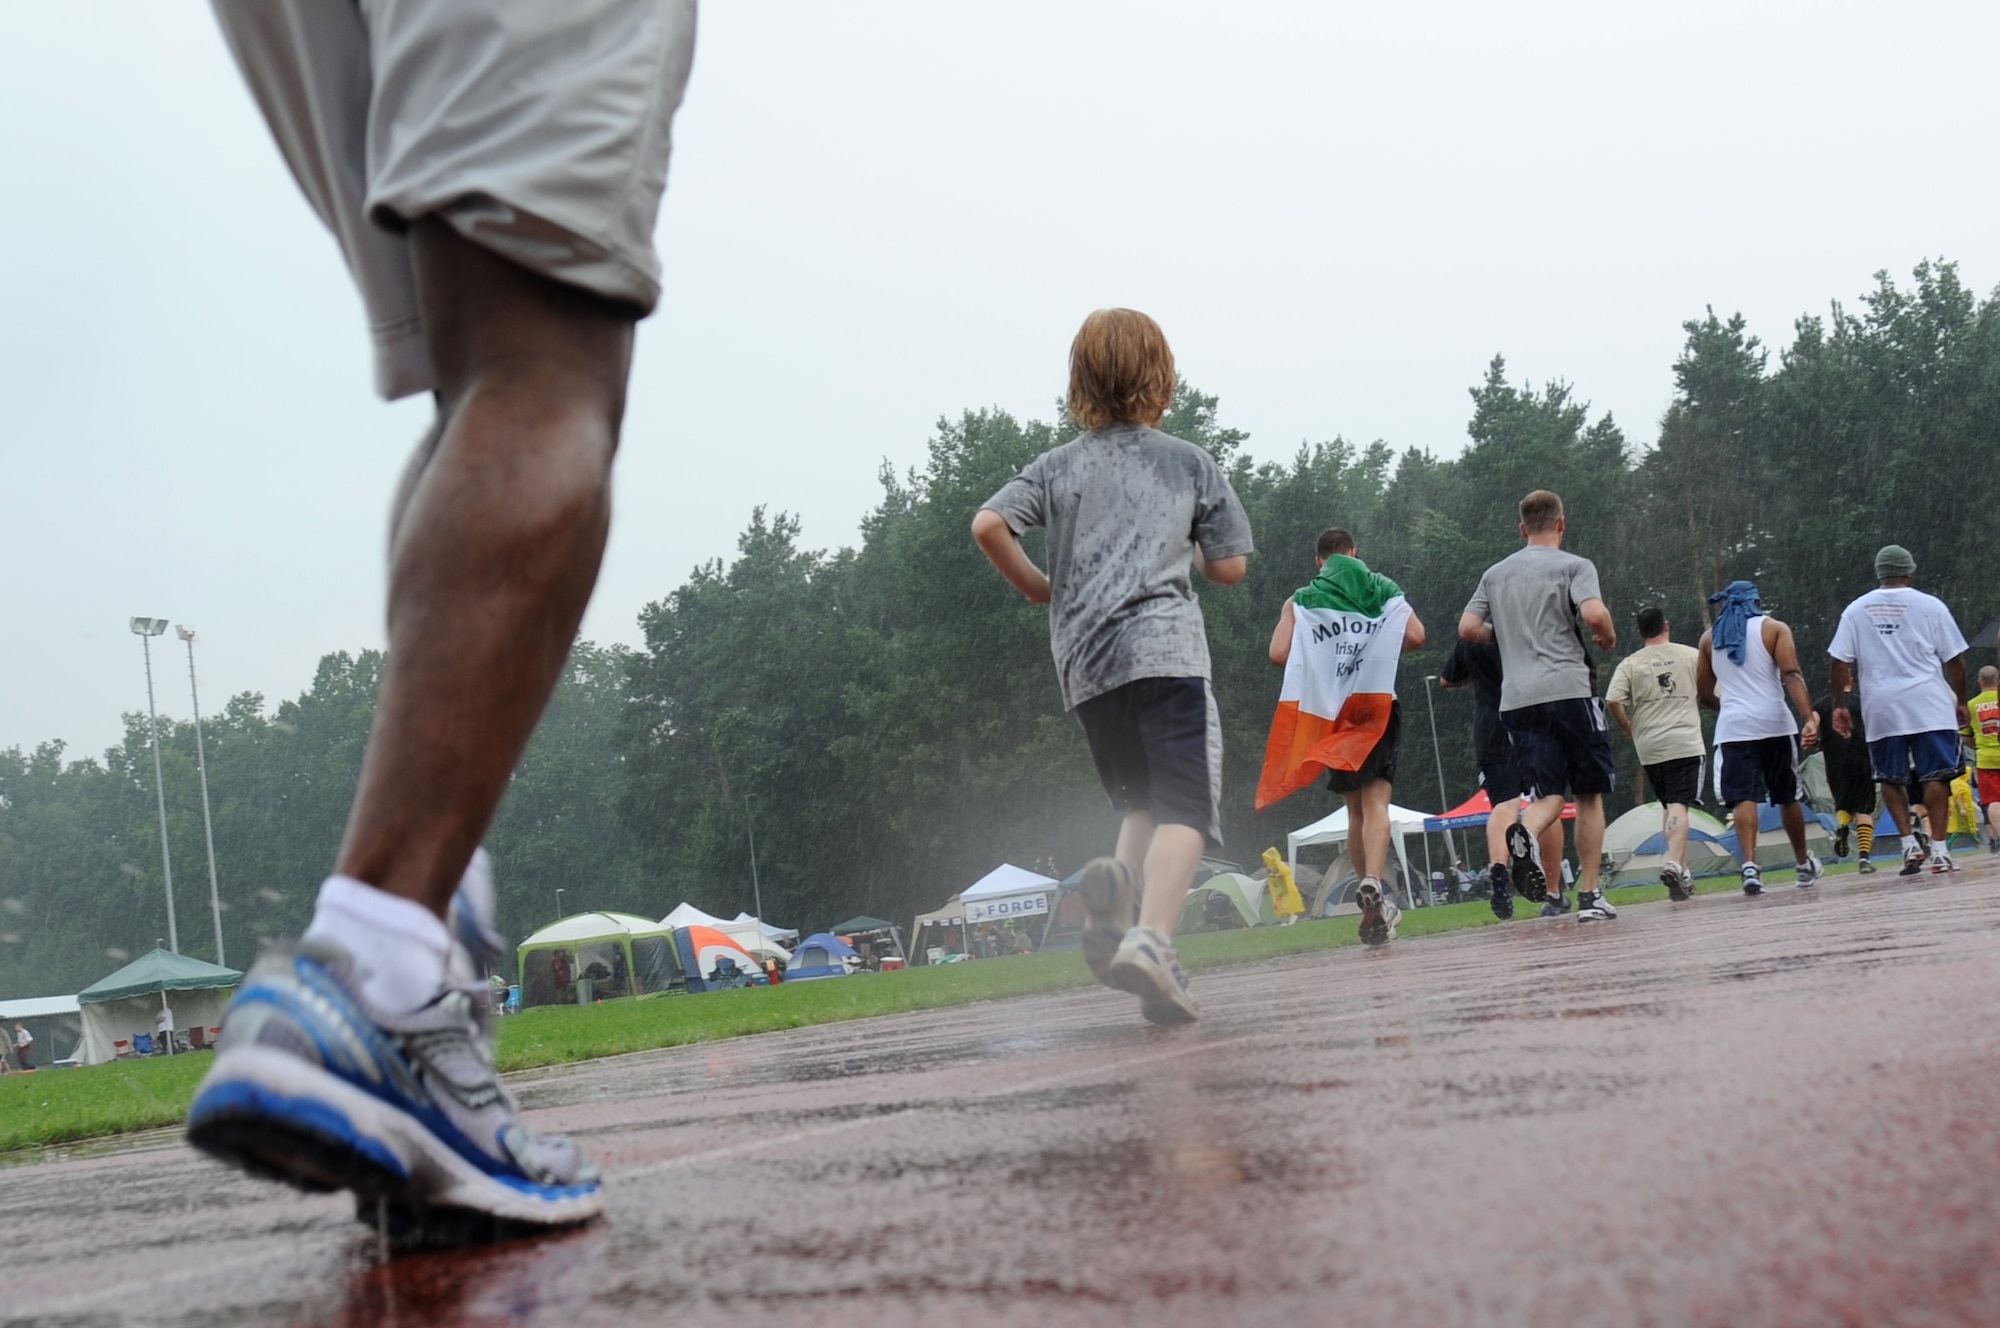 Rain doesn't stop participants from making their way around the track at Pulaski Barracks during the annual KMC Viking Challenge, July 30, 2011. More than 1,000 KMC members took part in the 24-hour event hosted by the KMC 5/6 Club. This year, the club plans to donate funds to both Fisher Houses on Landstuhl Regional Medical Center. (U.S. Air Force photo by Senior Airman Brittany Perry)